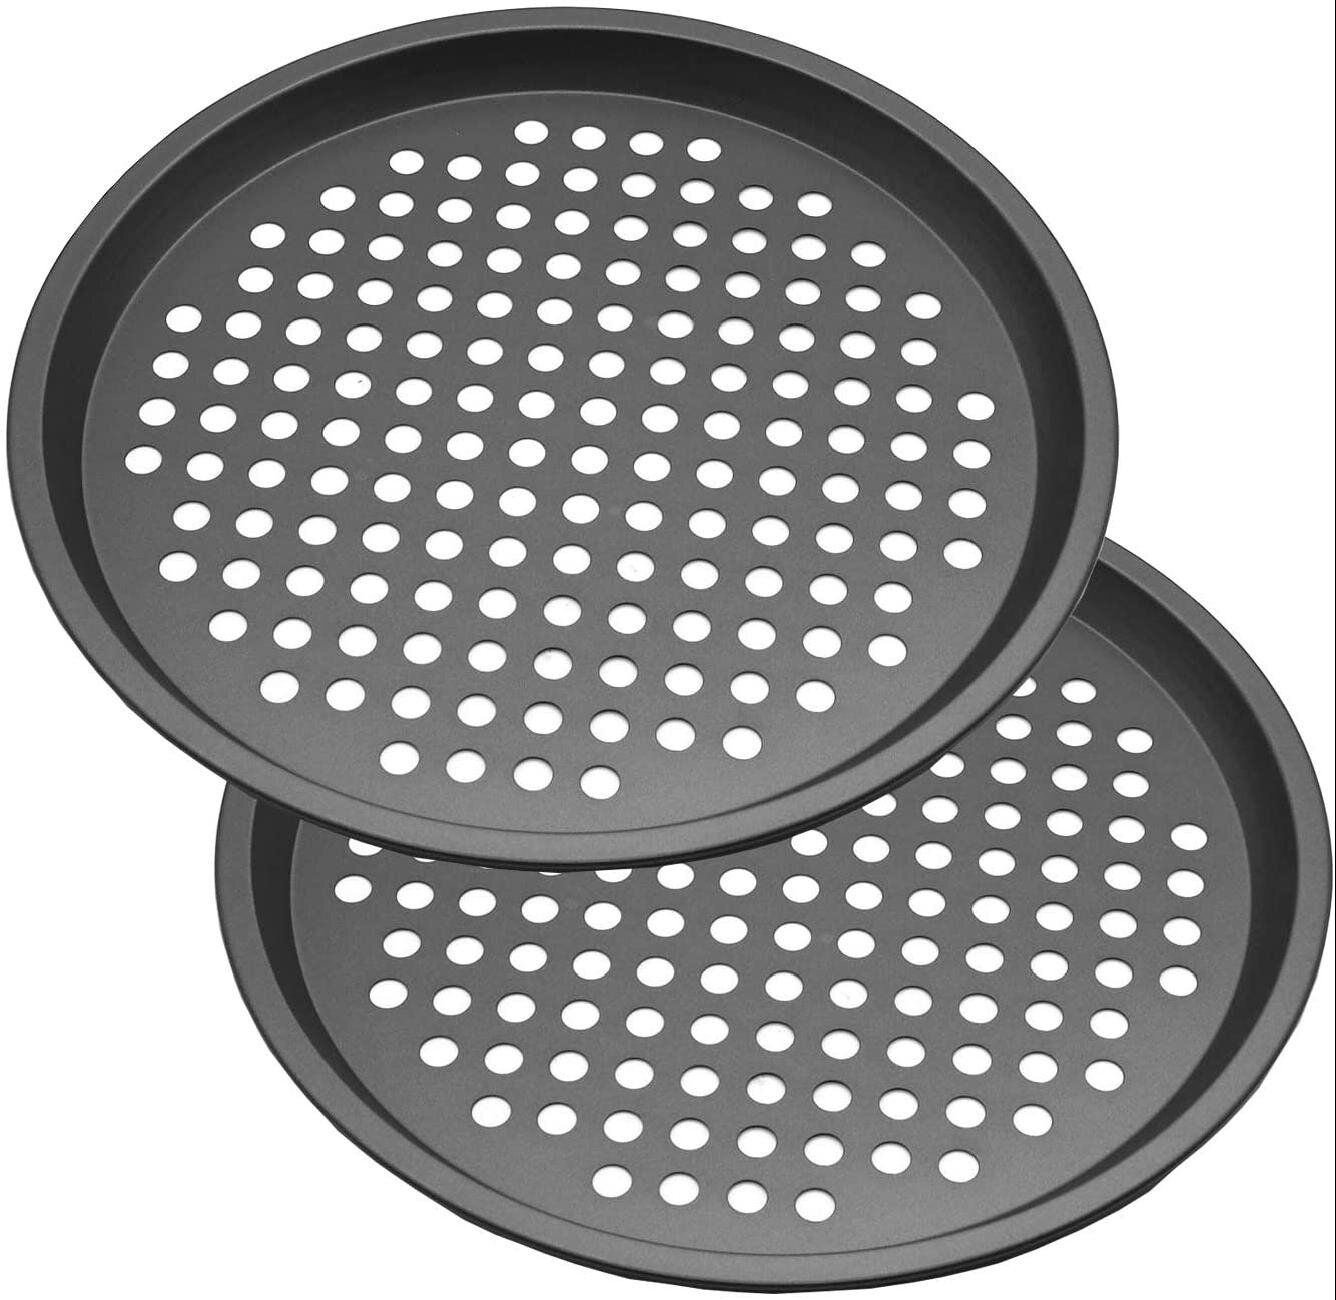 Carbon Steel Perforated Pizza Crisper Pan with Nonstick Coating Pack of 2 Pizza Pans With Holes 13 inch 